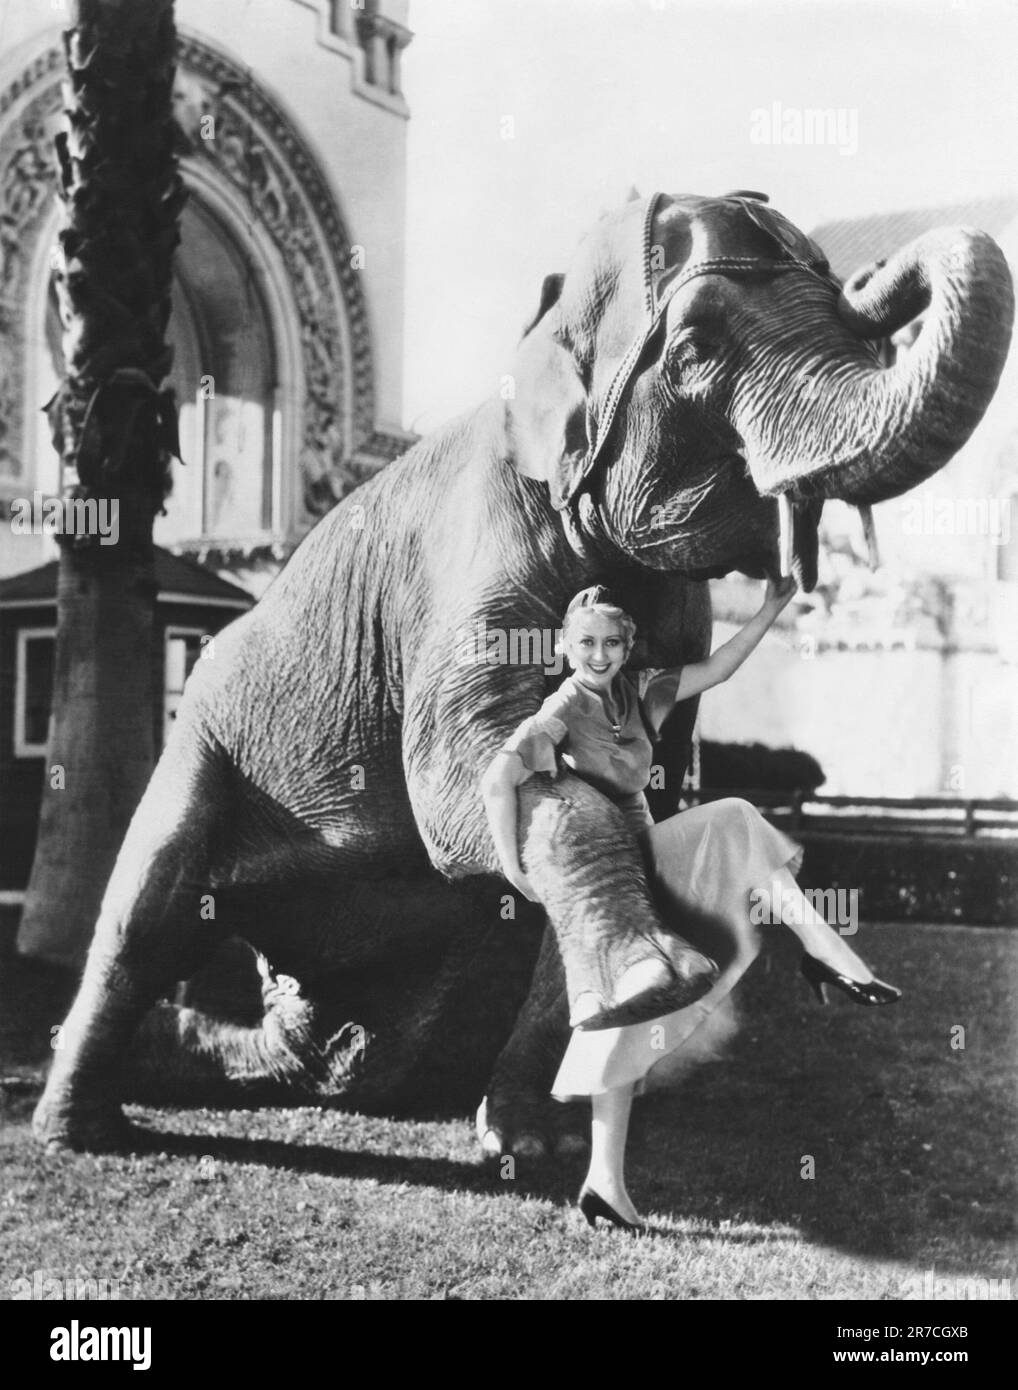 Chicago, Illinois:  December 21, 1931 Actress Joan Blondell tries out a new elephant dance at the First National studio where she is filmihg 'Union Depot'. Stock Photo